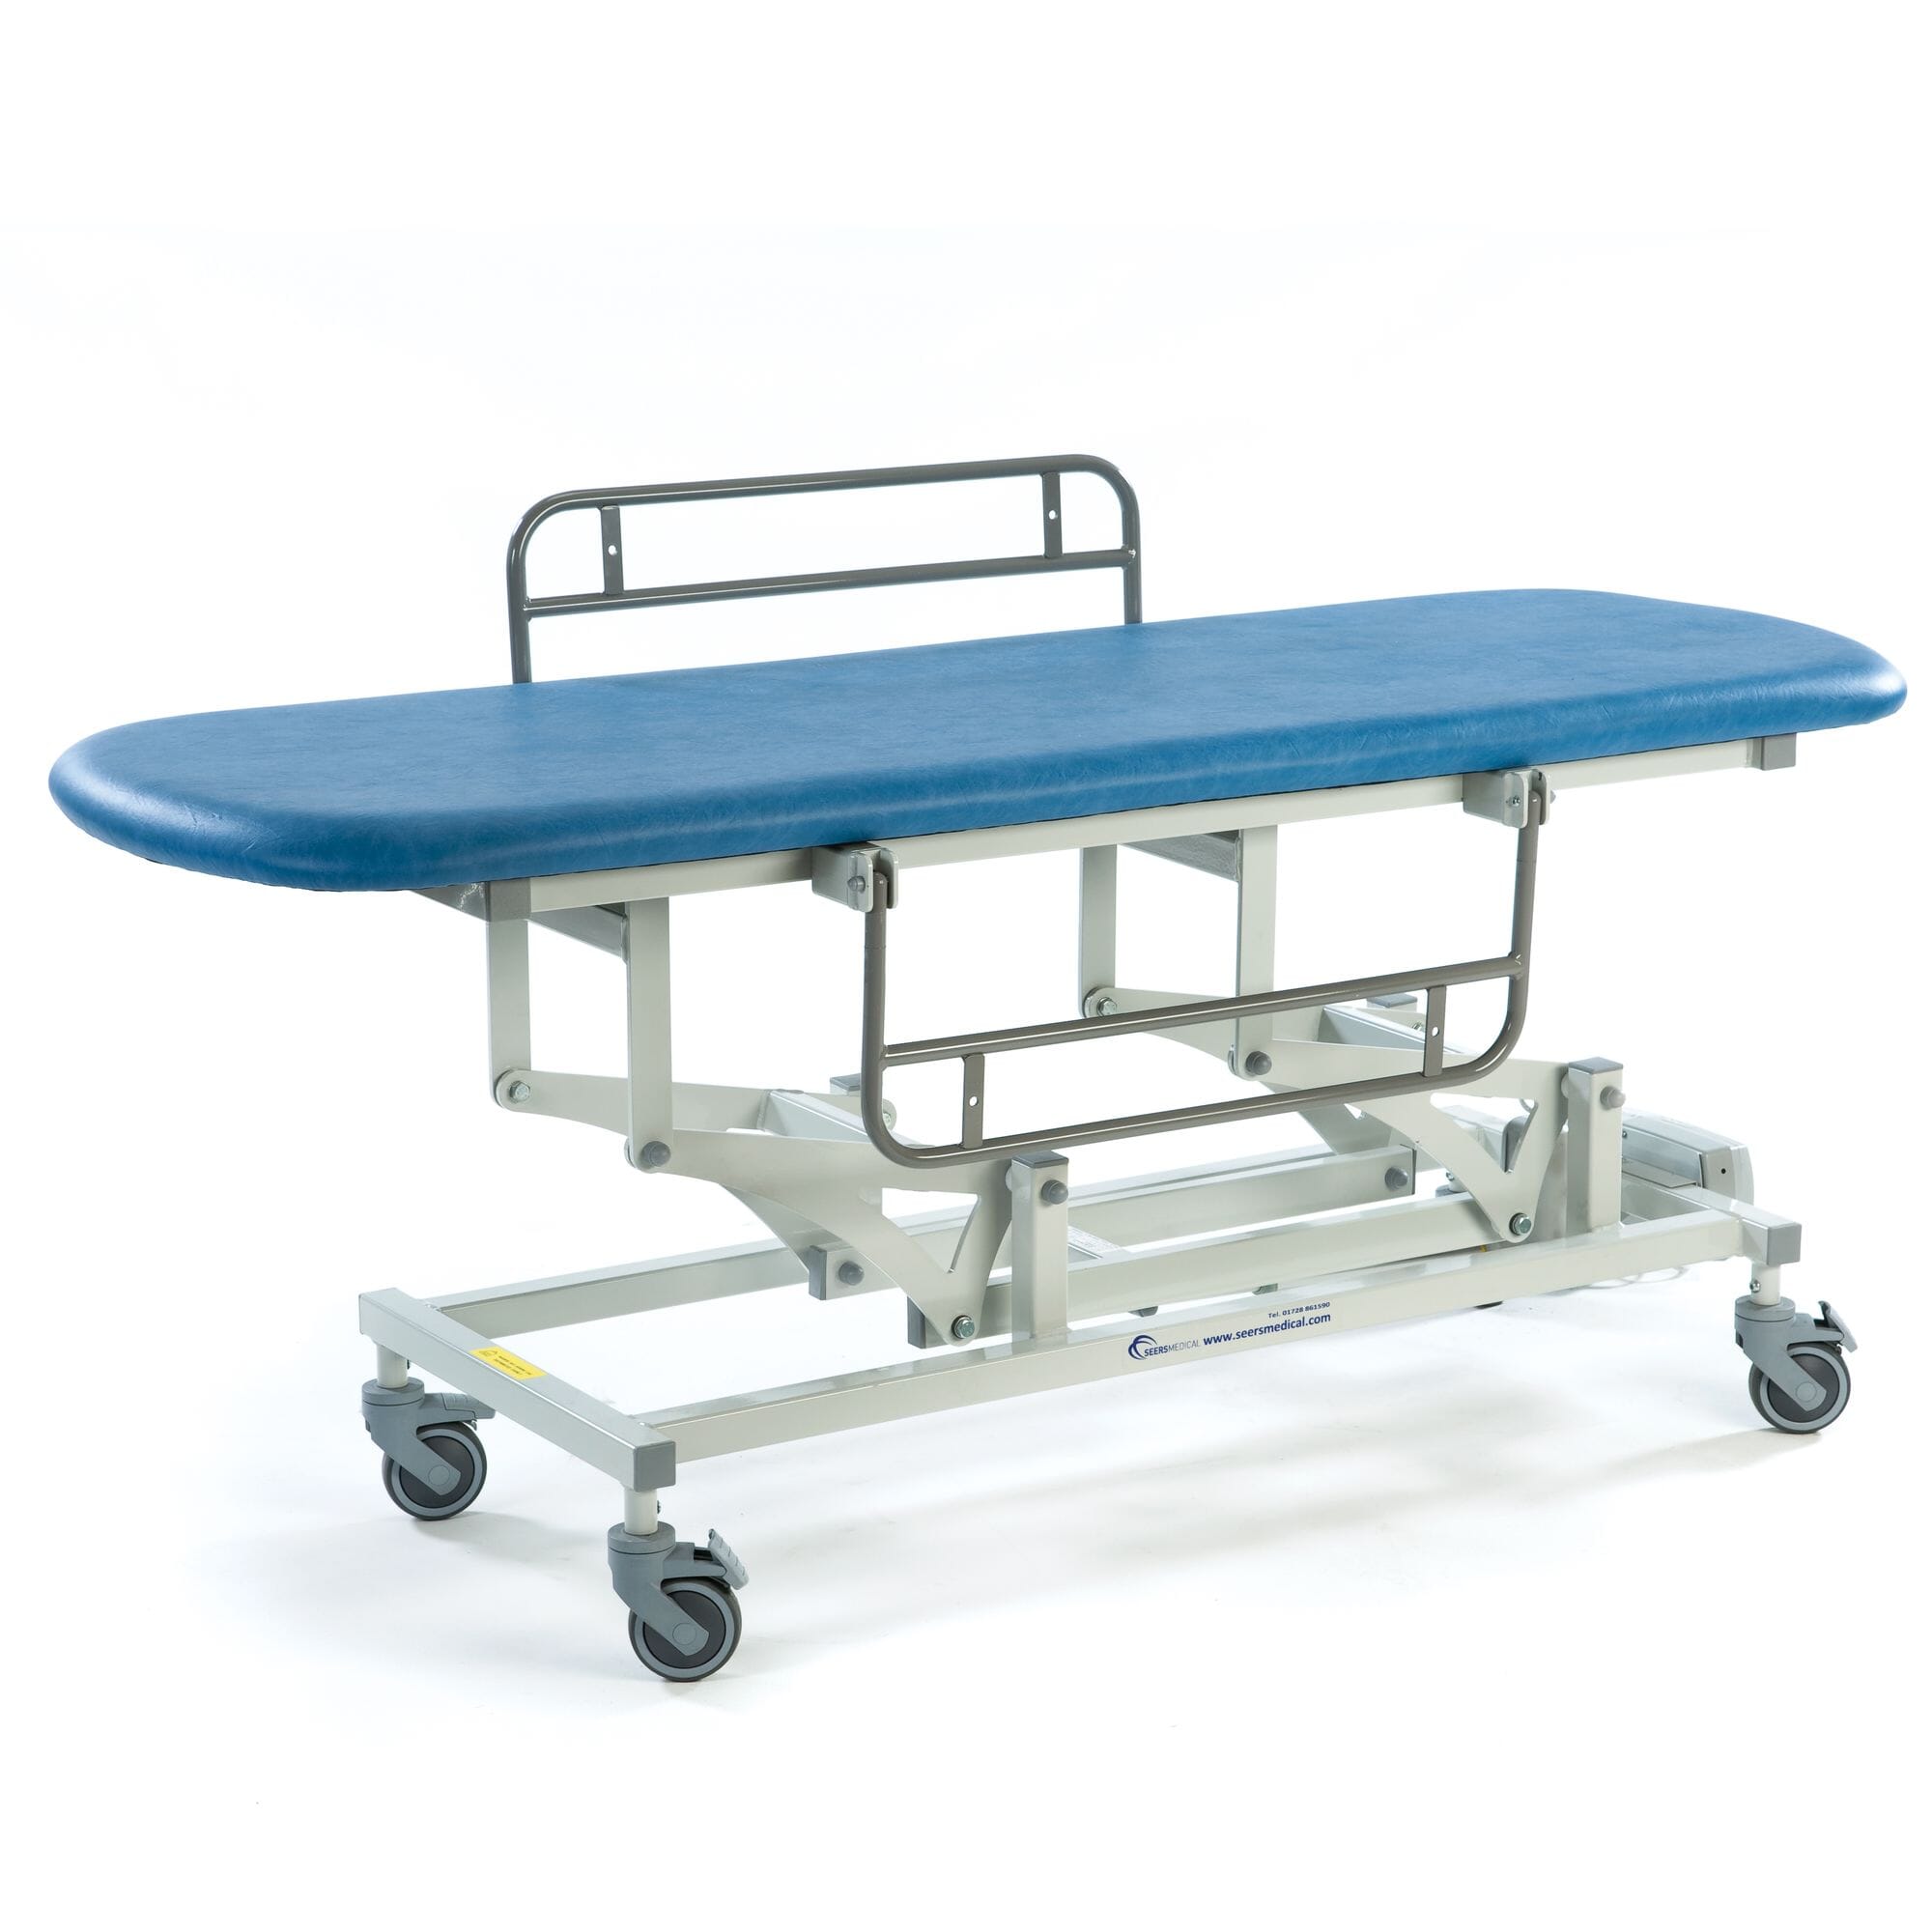 View Electric Sterling Changing Table Sky Blue 1840mm information